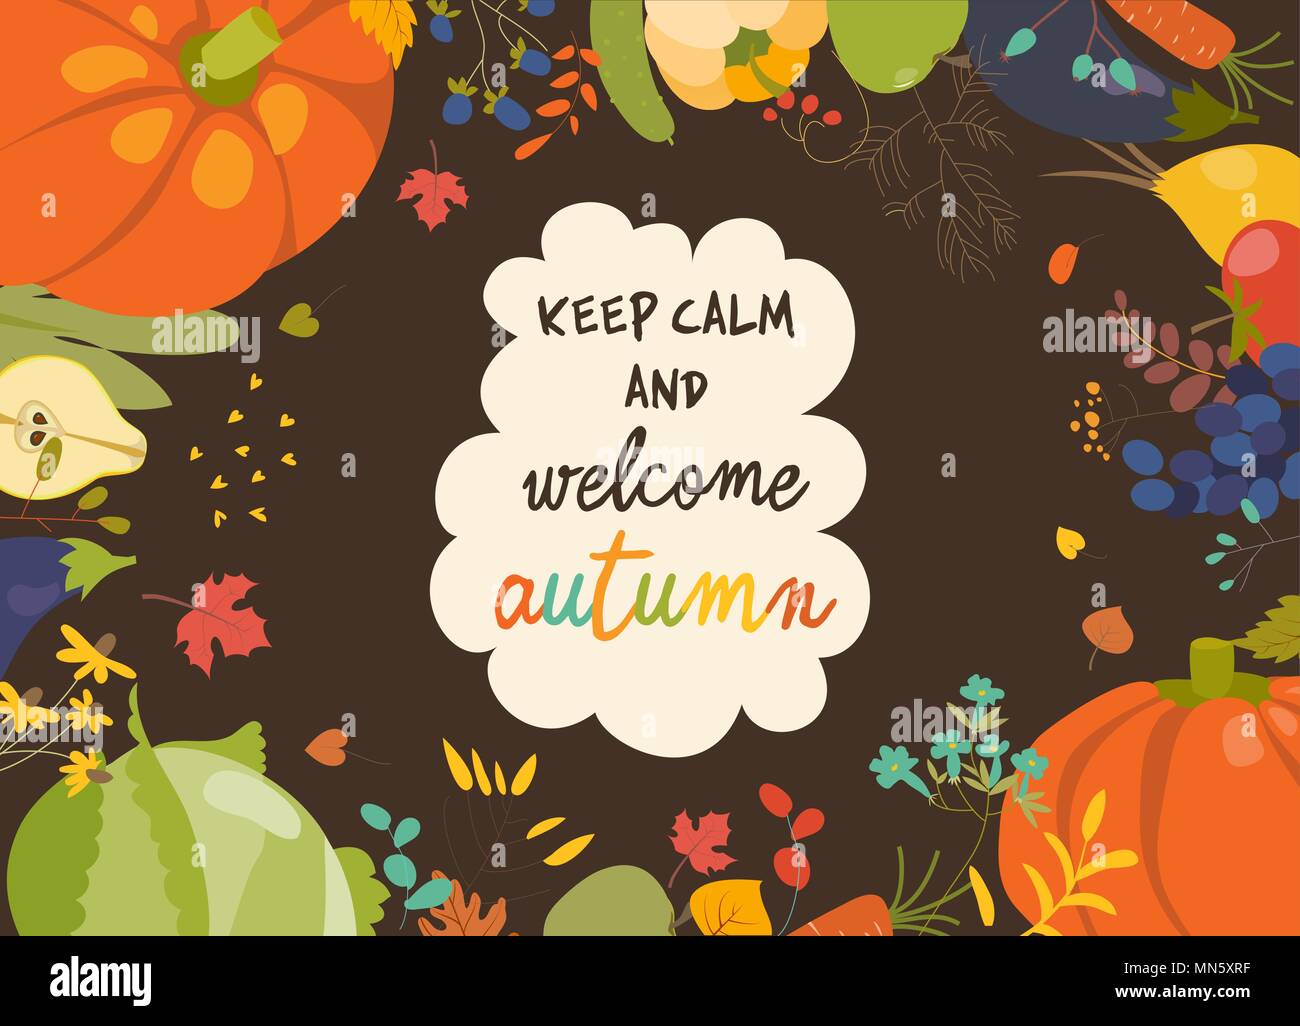 Autumn nature frame of fall season with vegetables and leaves Stock Vector